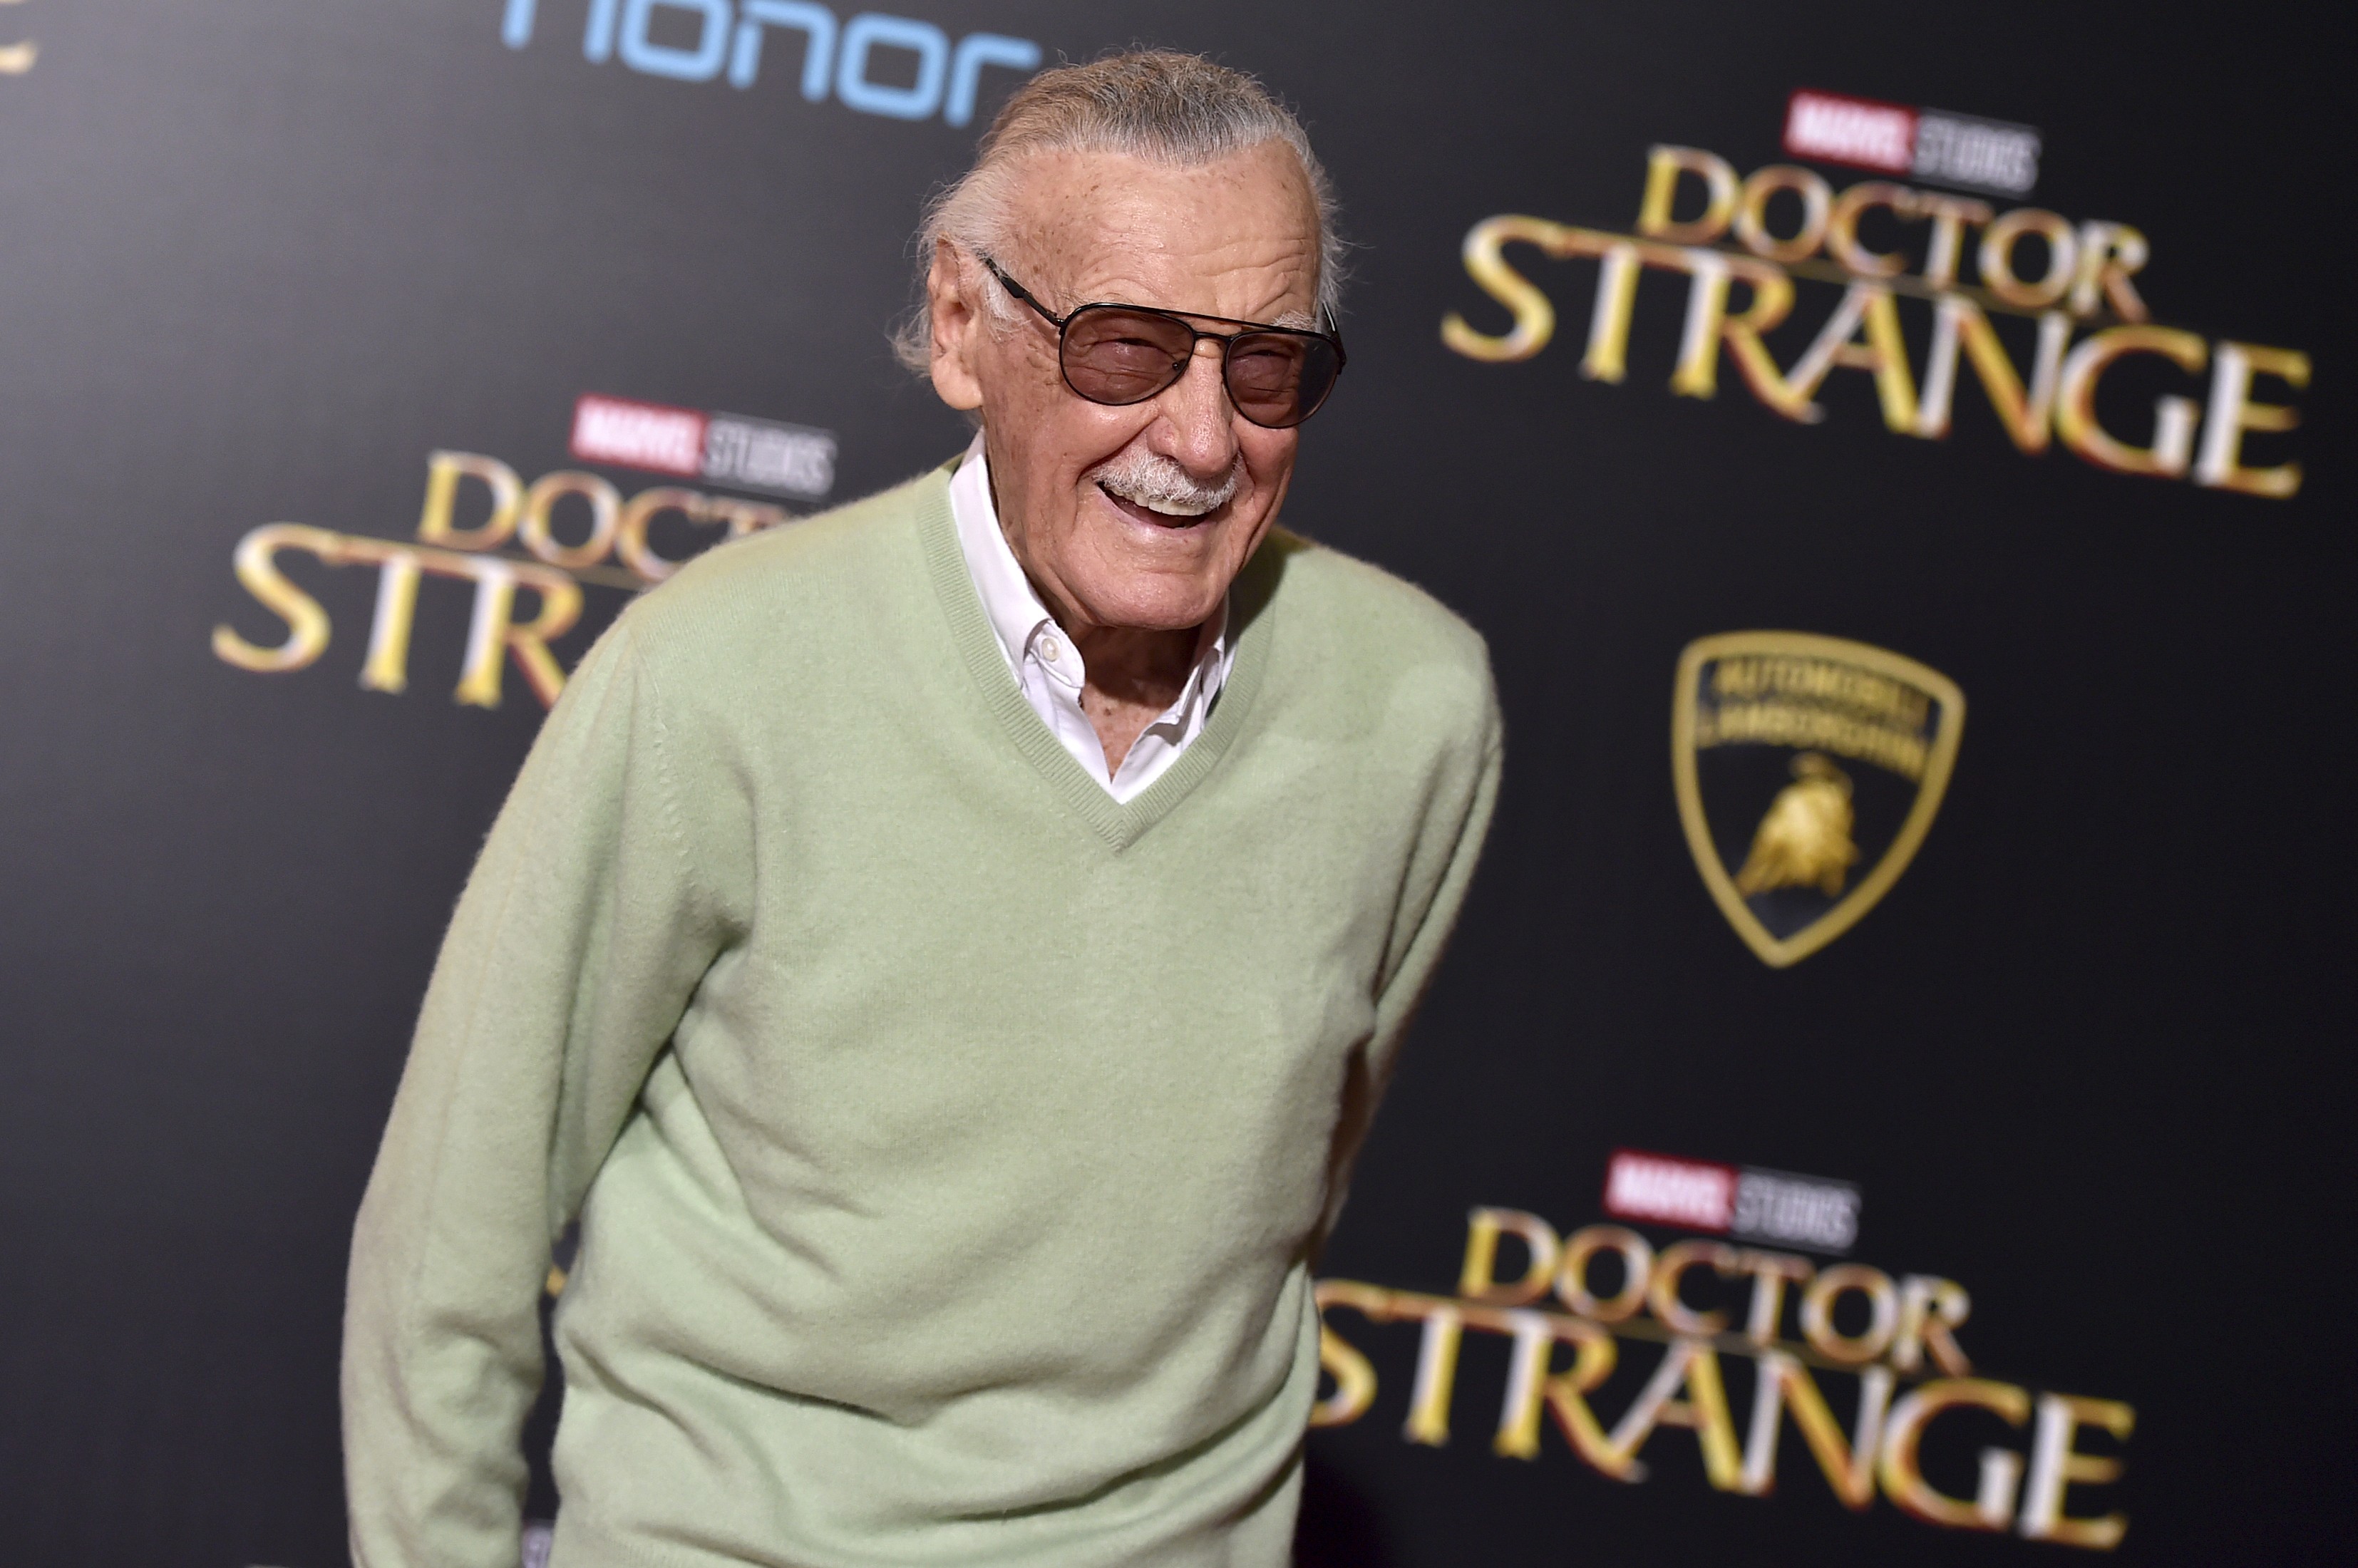 Stan Lee officially retired from Marvel Comics in 1972 having joined as an 18-year-old. Photo: Jordan Strauss/Invision/AP